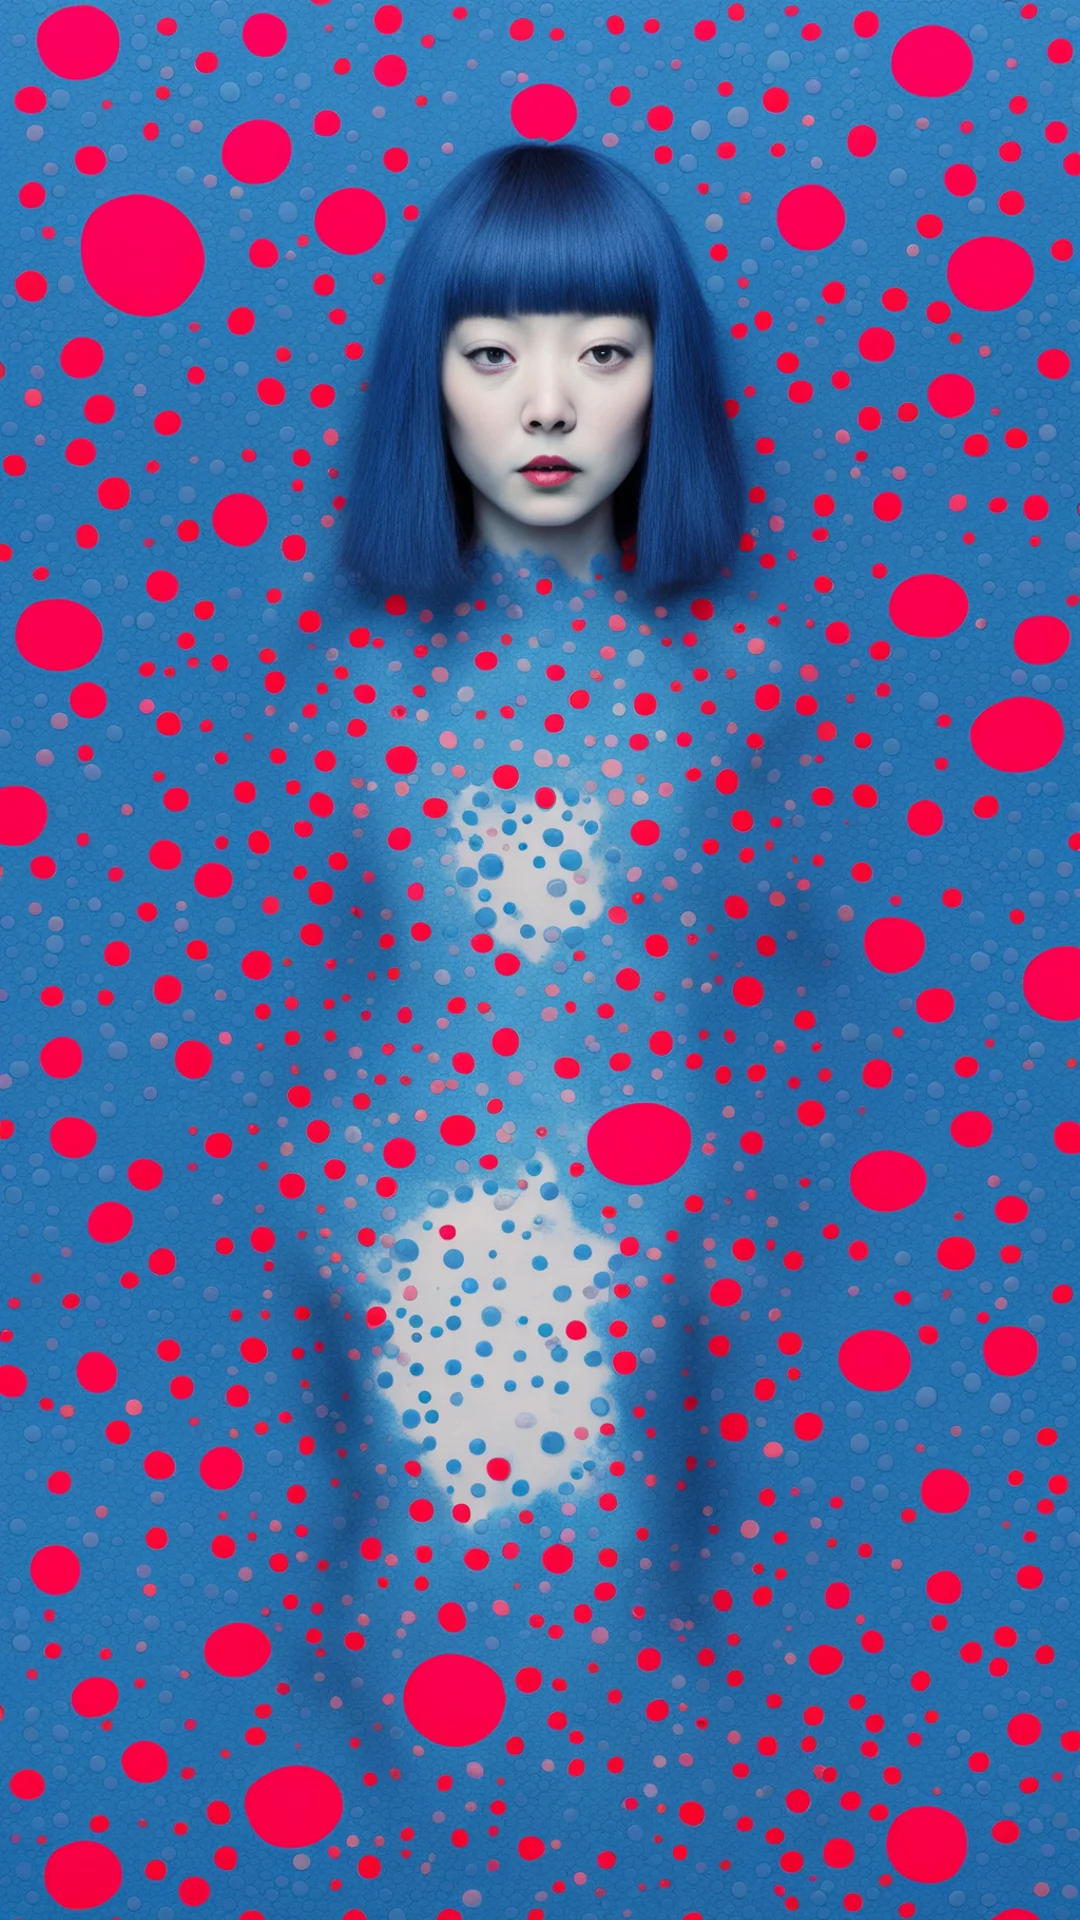 angst and distress in blue tones yayoi kusama style confident engaging wow artstation art 3 tall